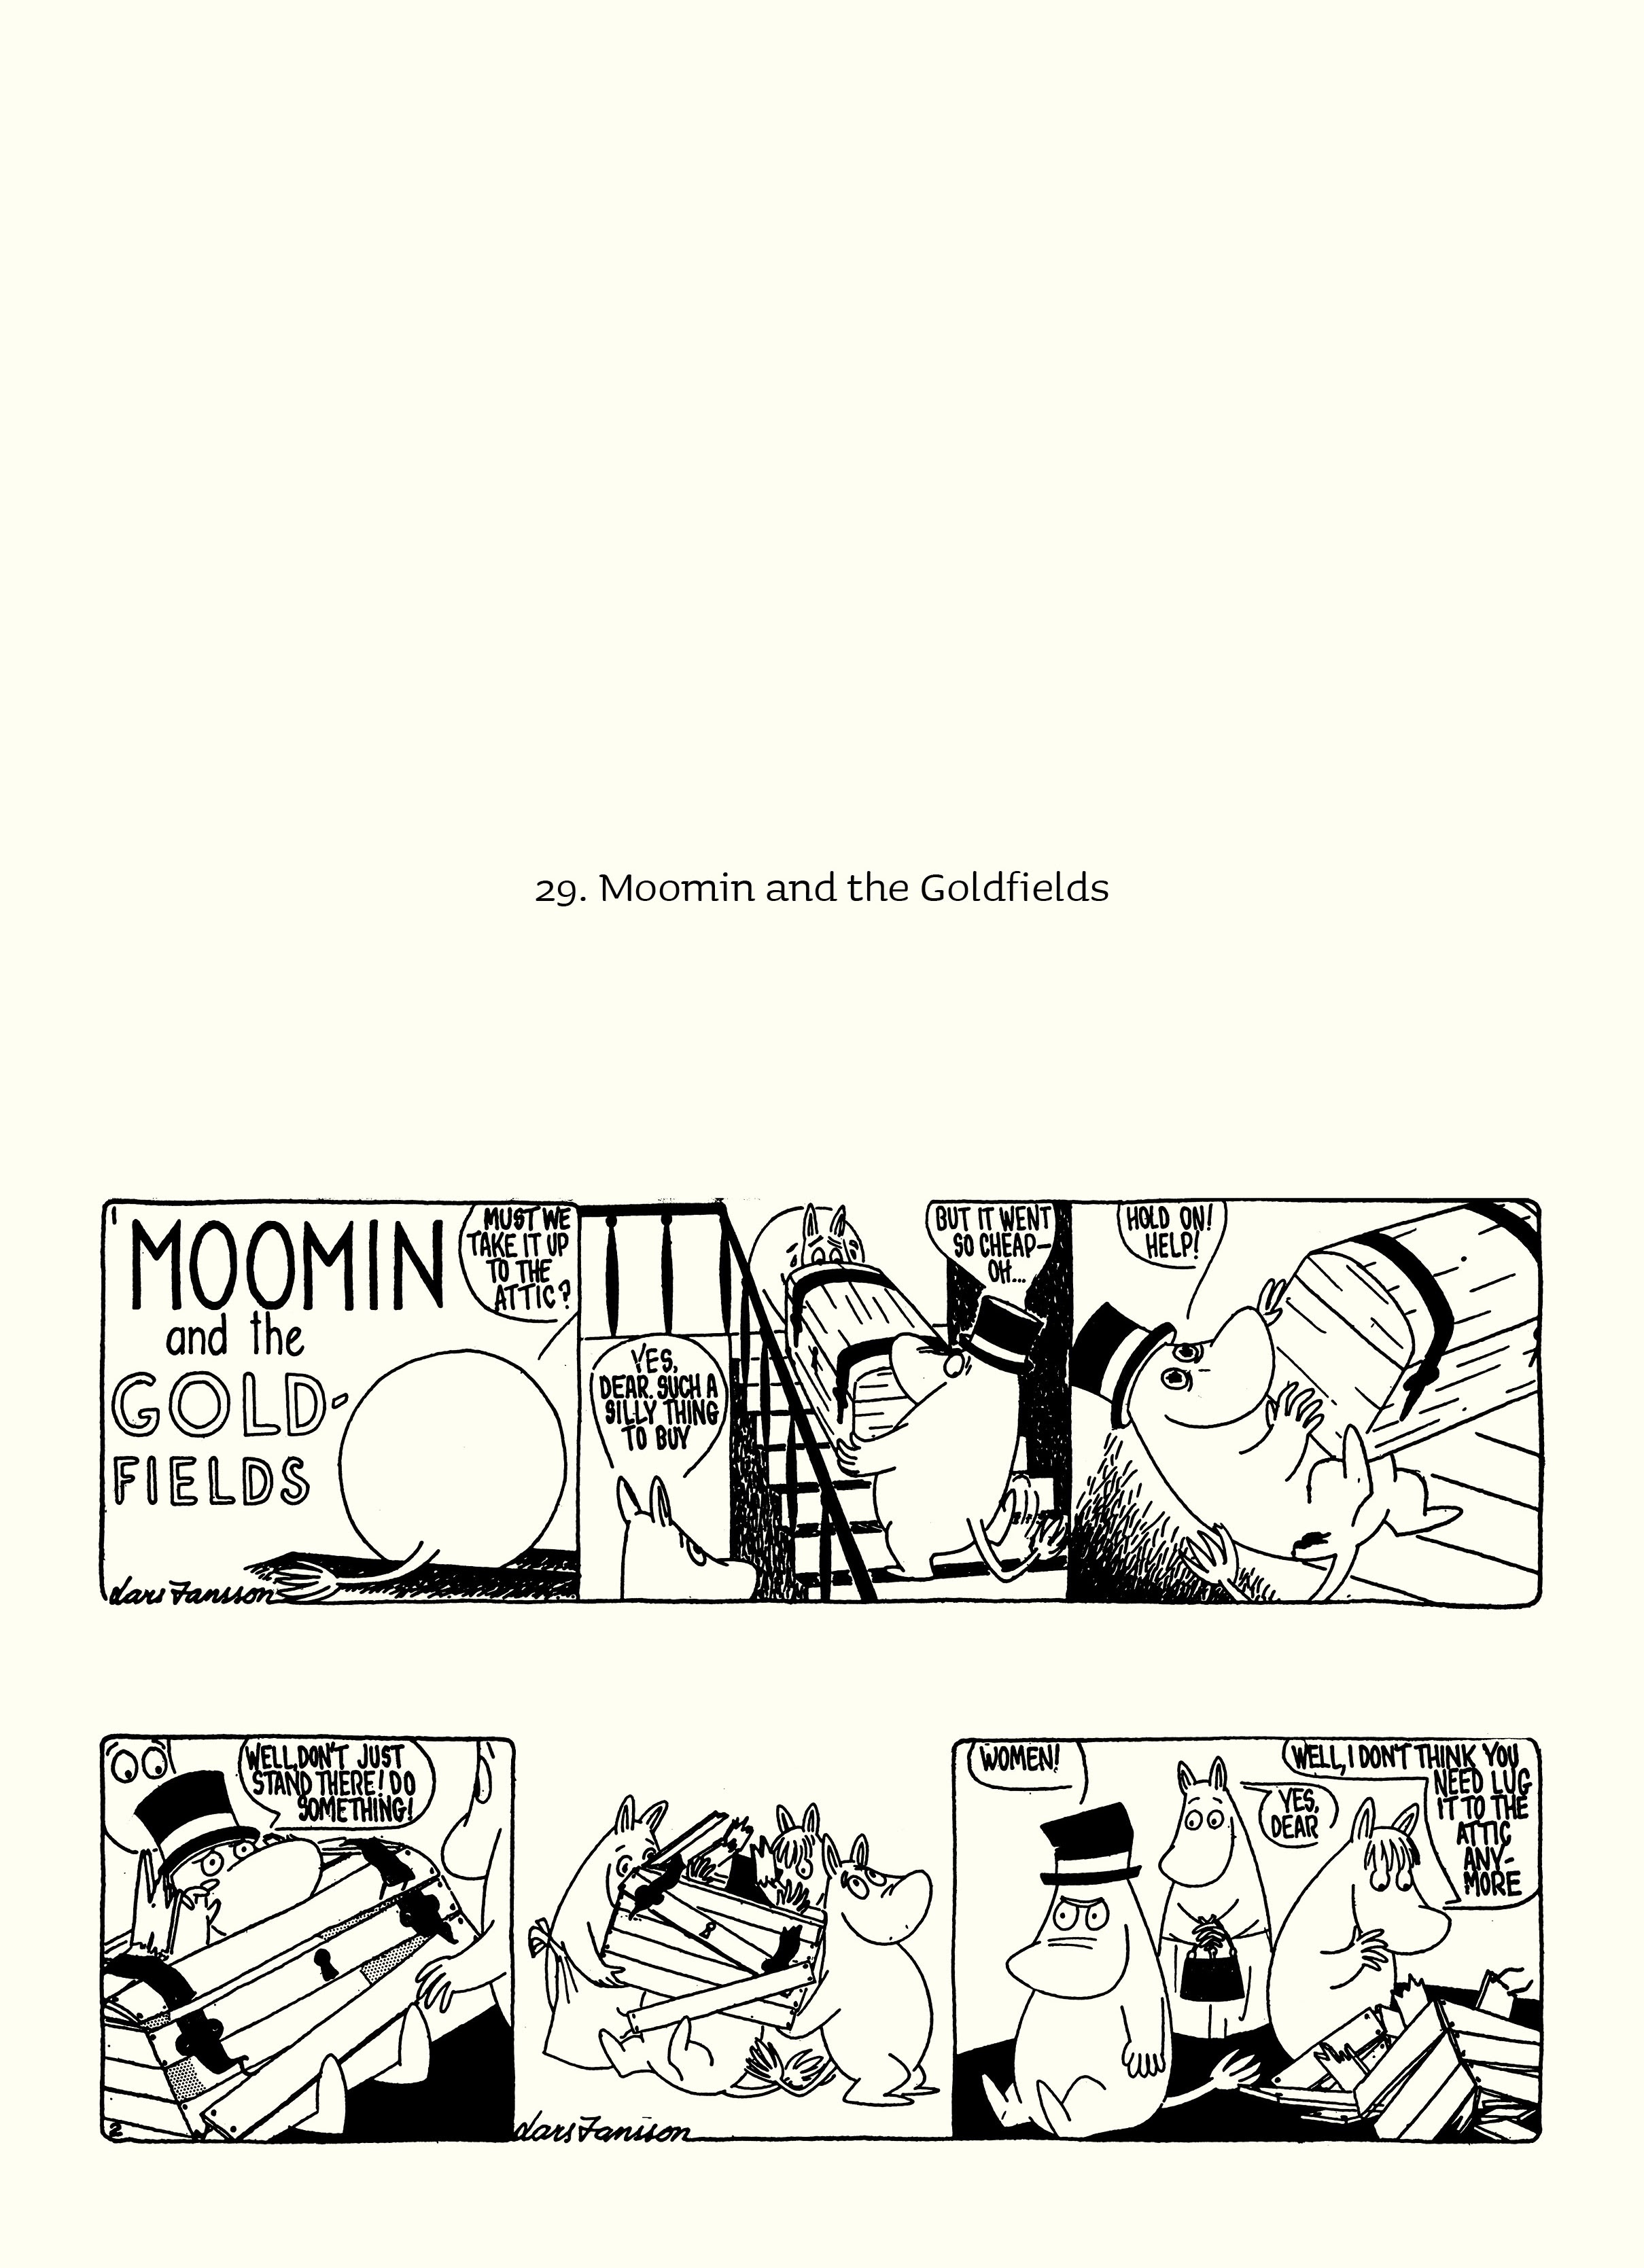 Read online Moomin: The Complete Lars Jansson Comic Strip comic -  Issue # TPB 7 - 69